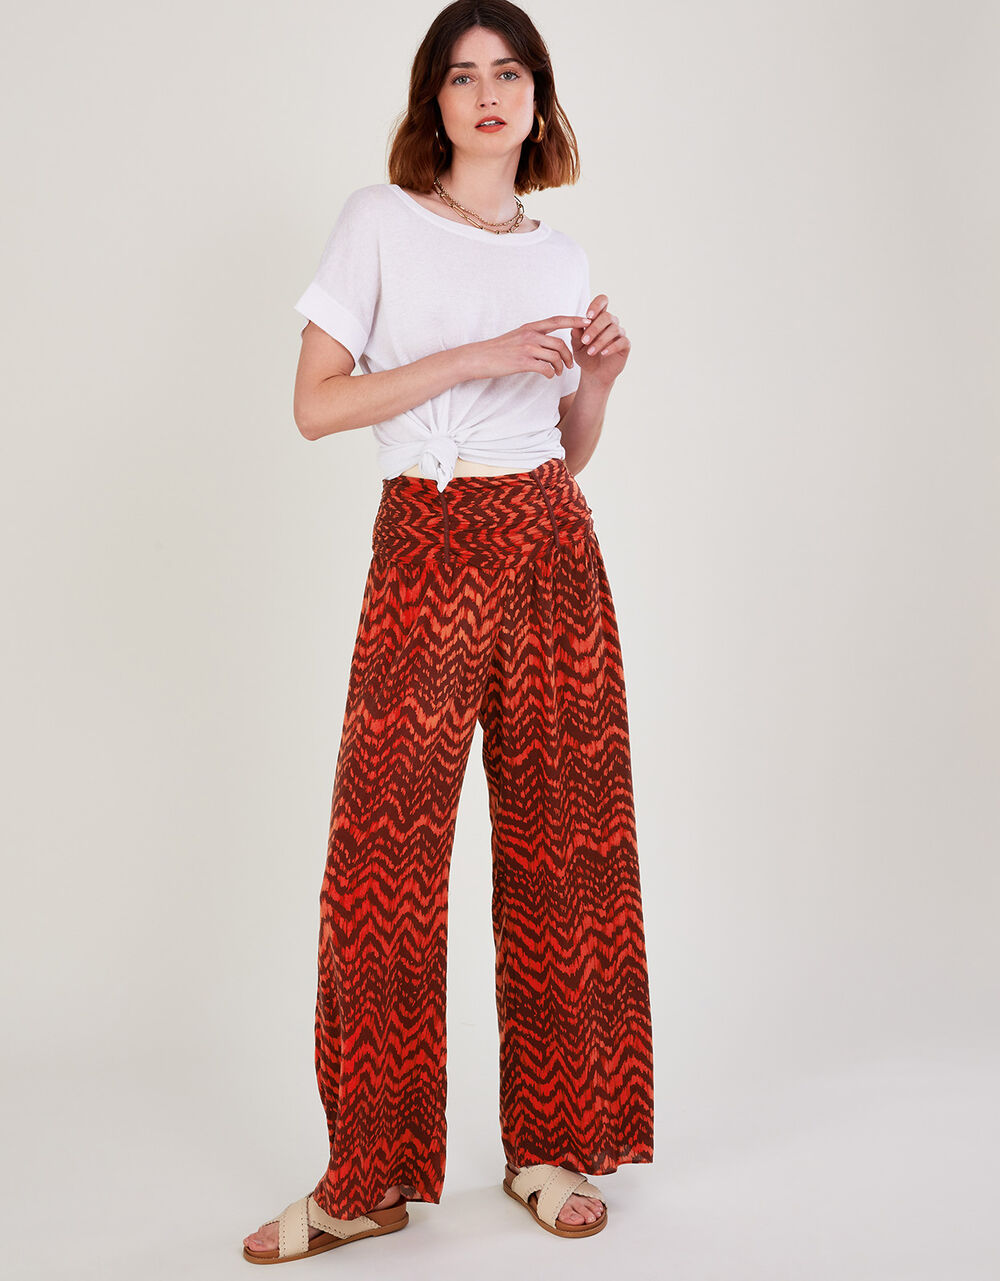 Women Women's Clothing | Ruched Waist Zig Zag Print Trousers Red - KT73093